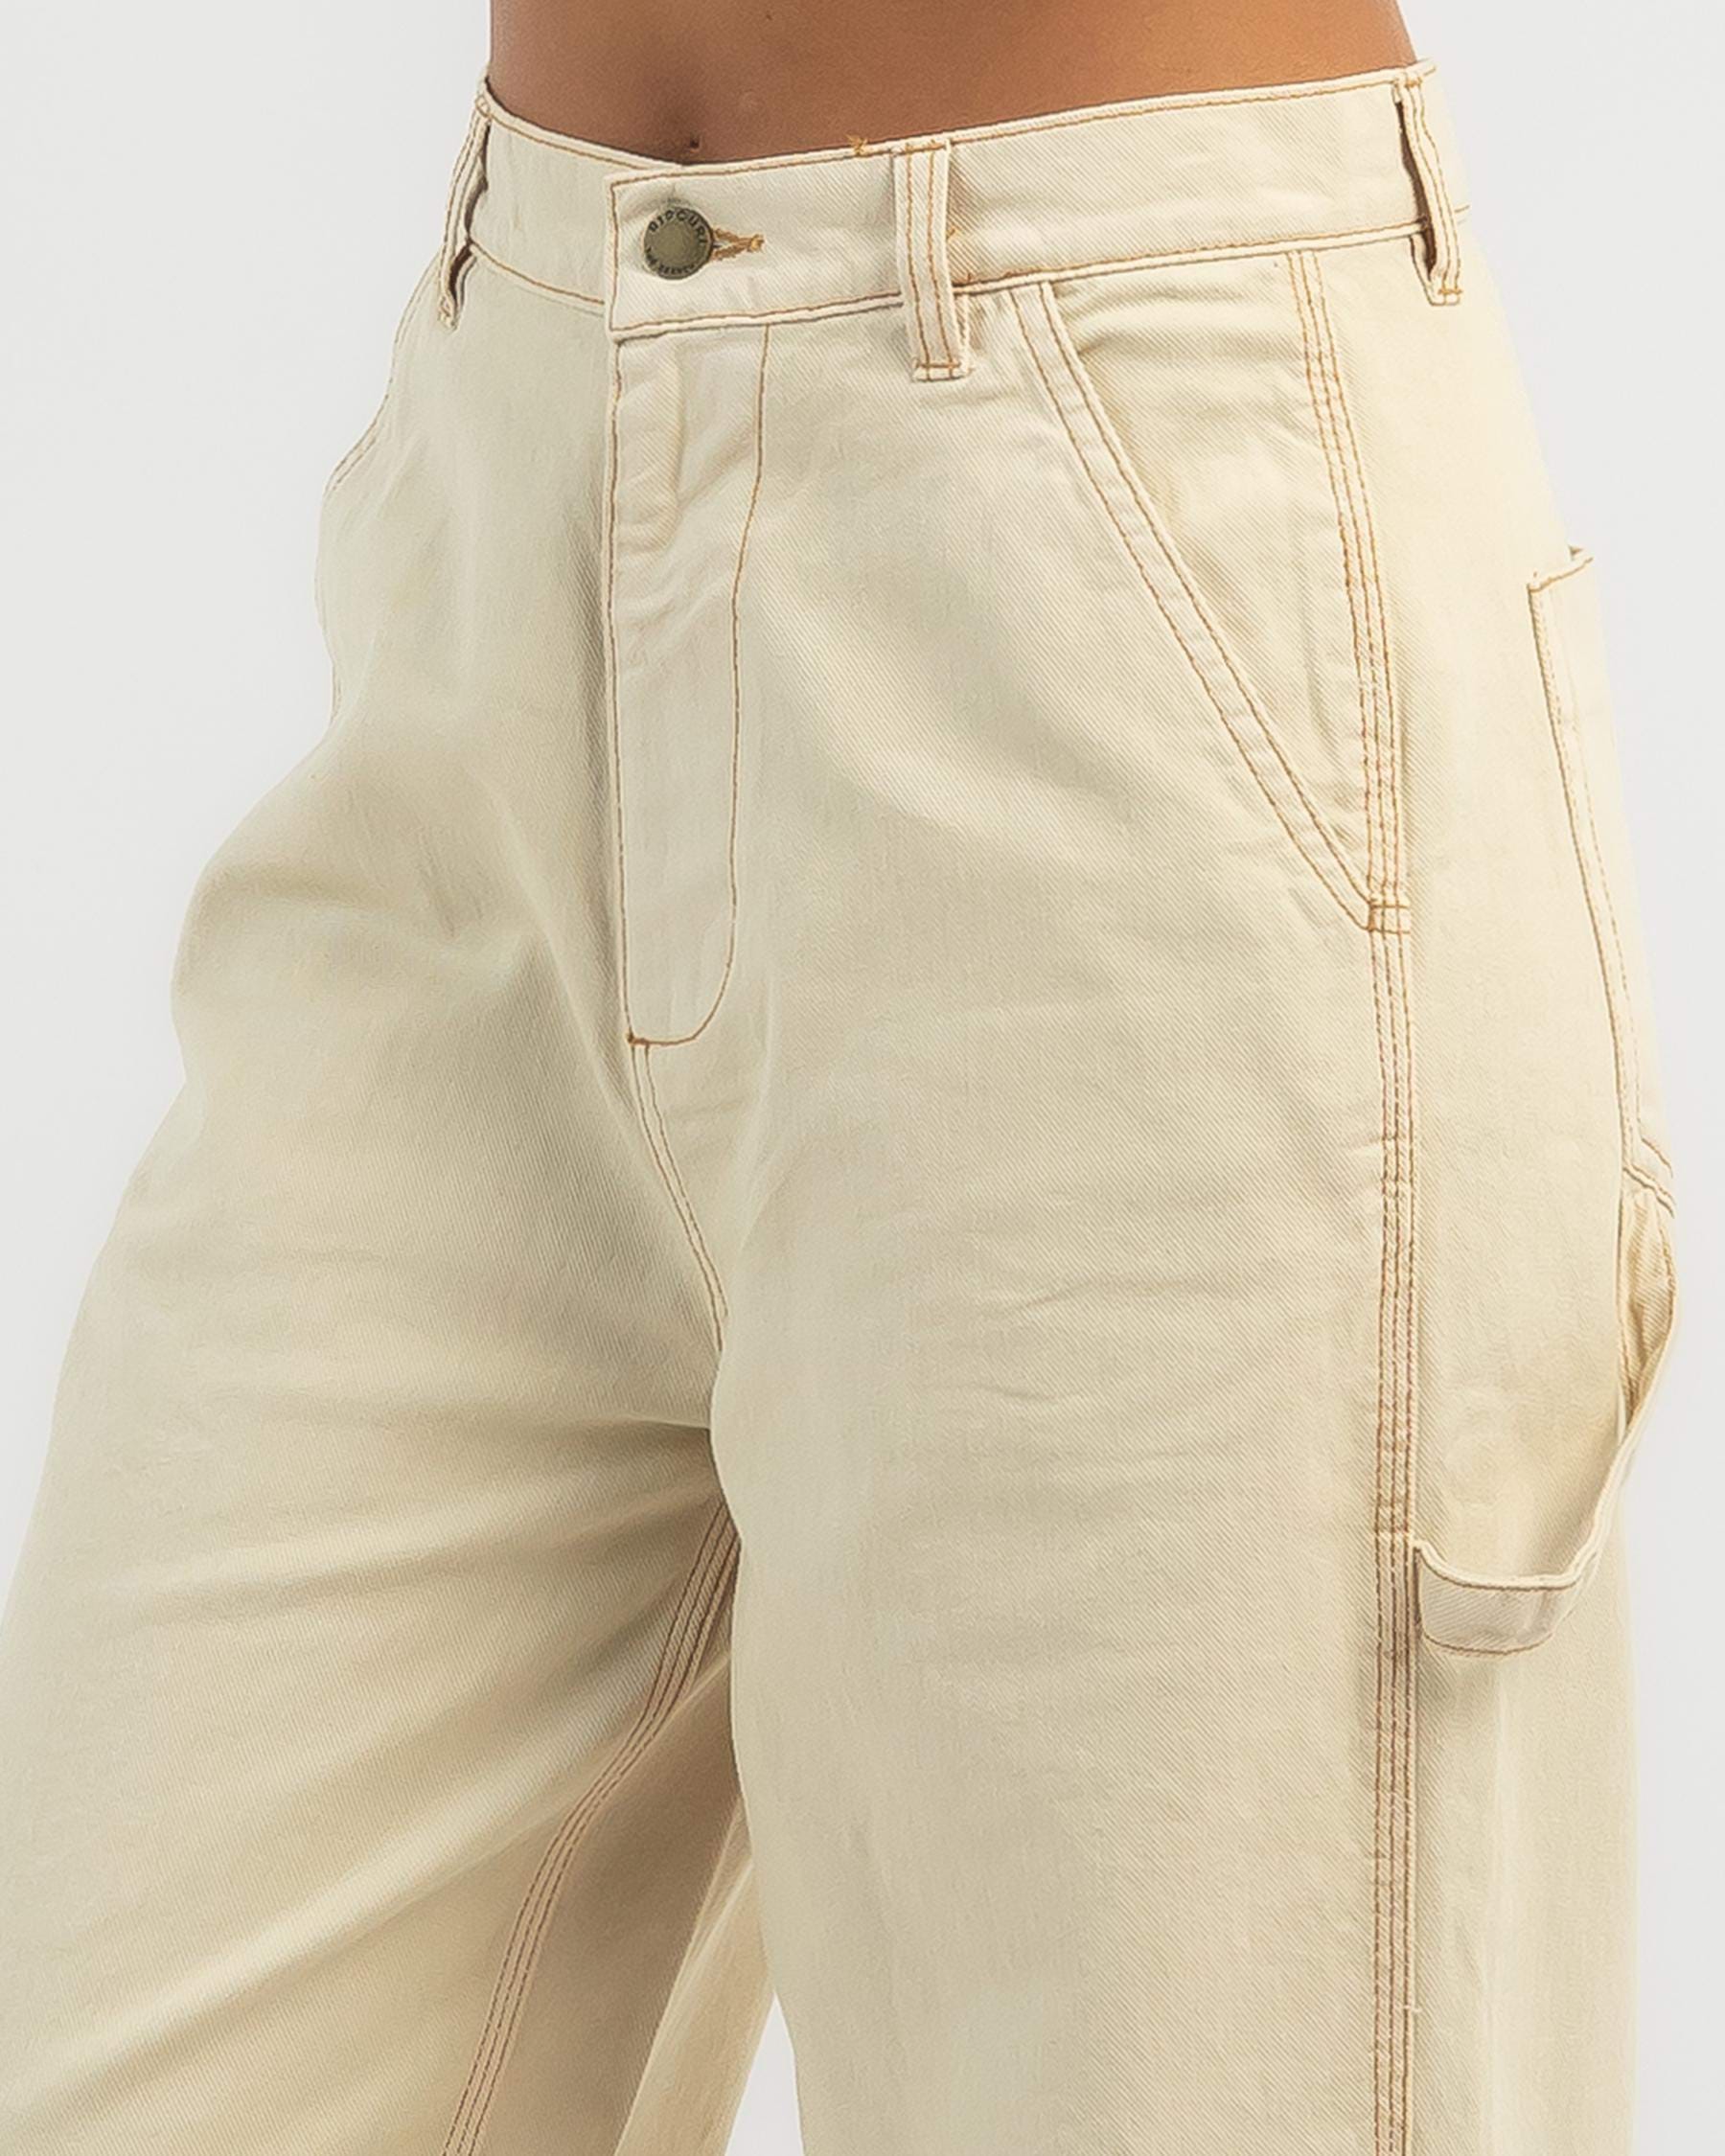 Rip Curl Arcadia Pants In Off White - Fast Shipping & Easy Returns ...